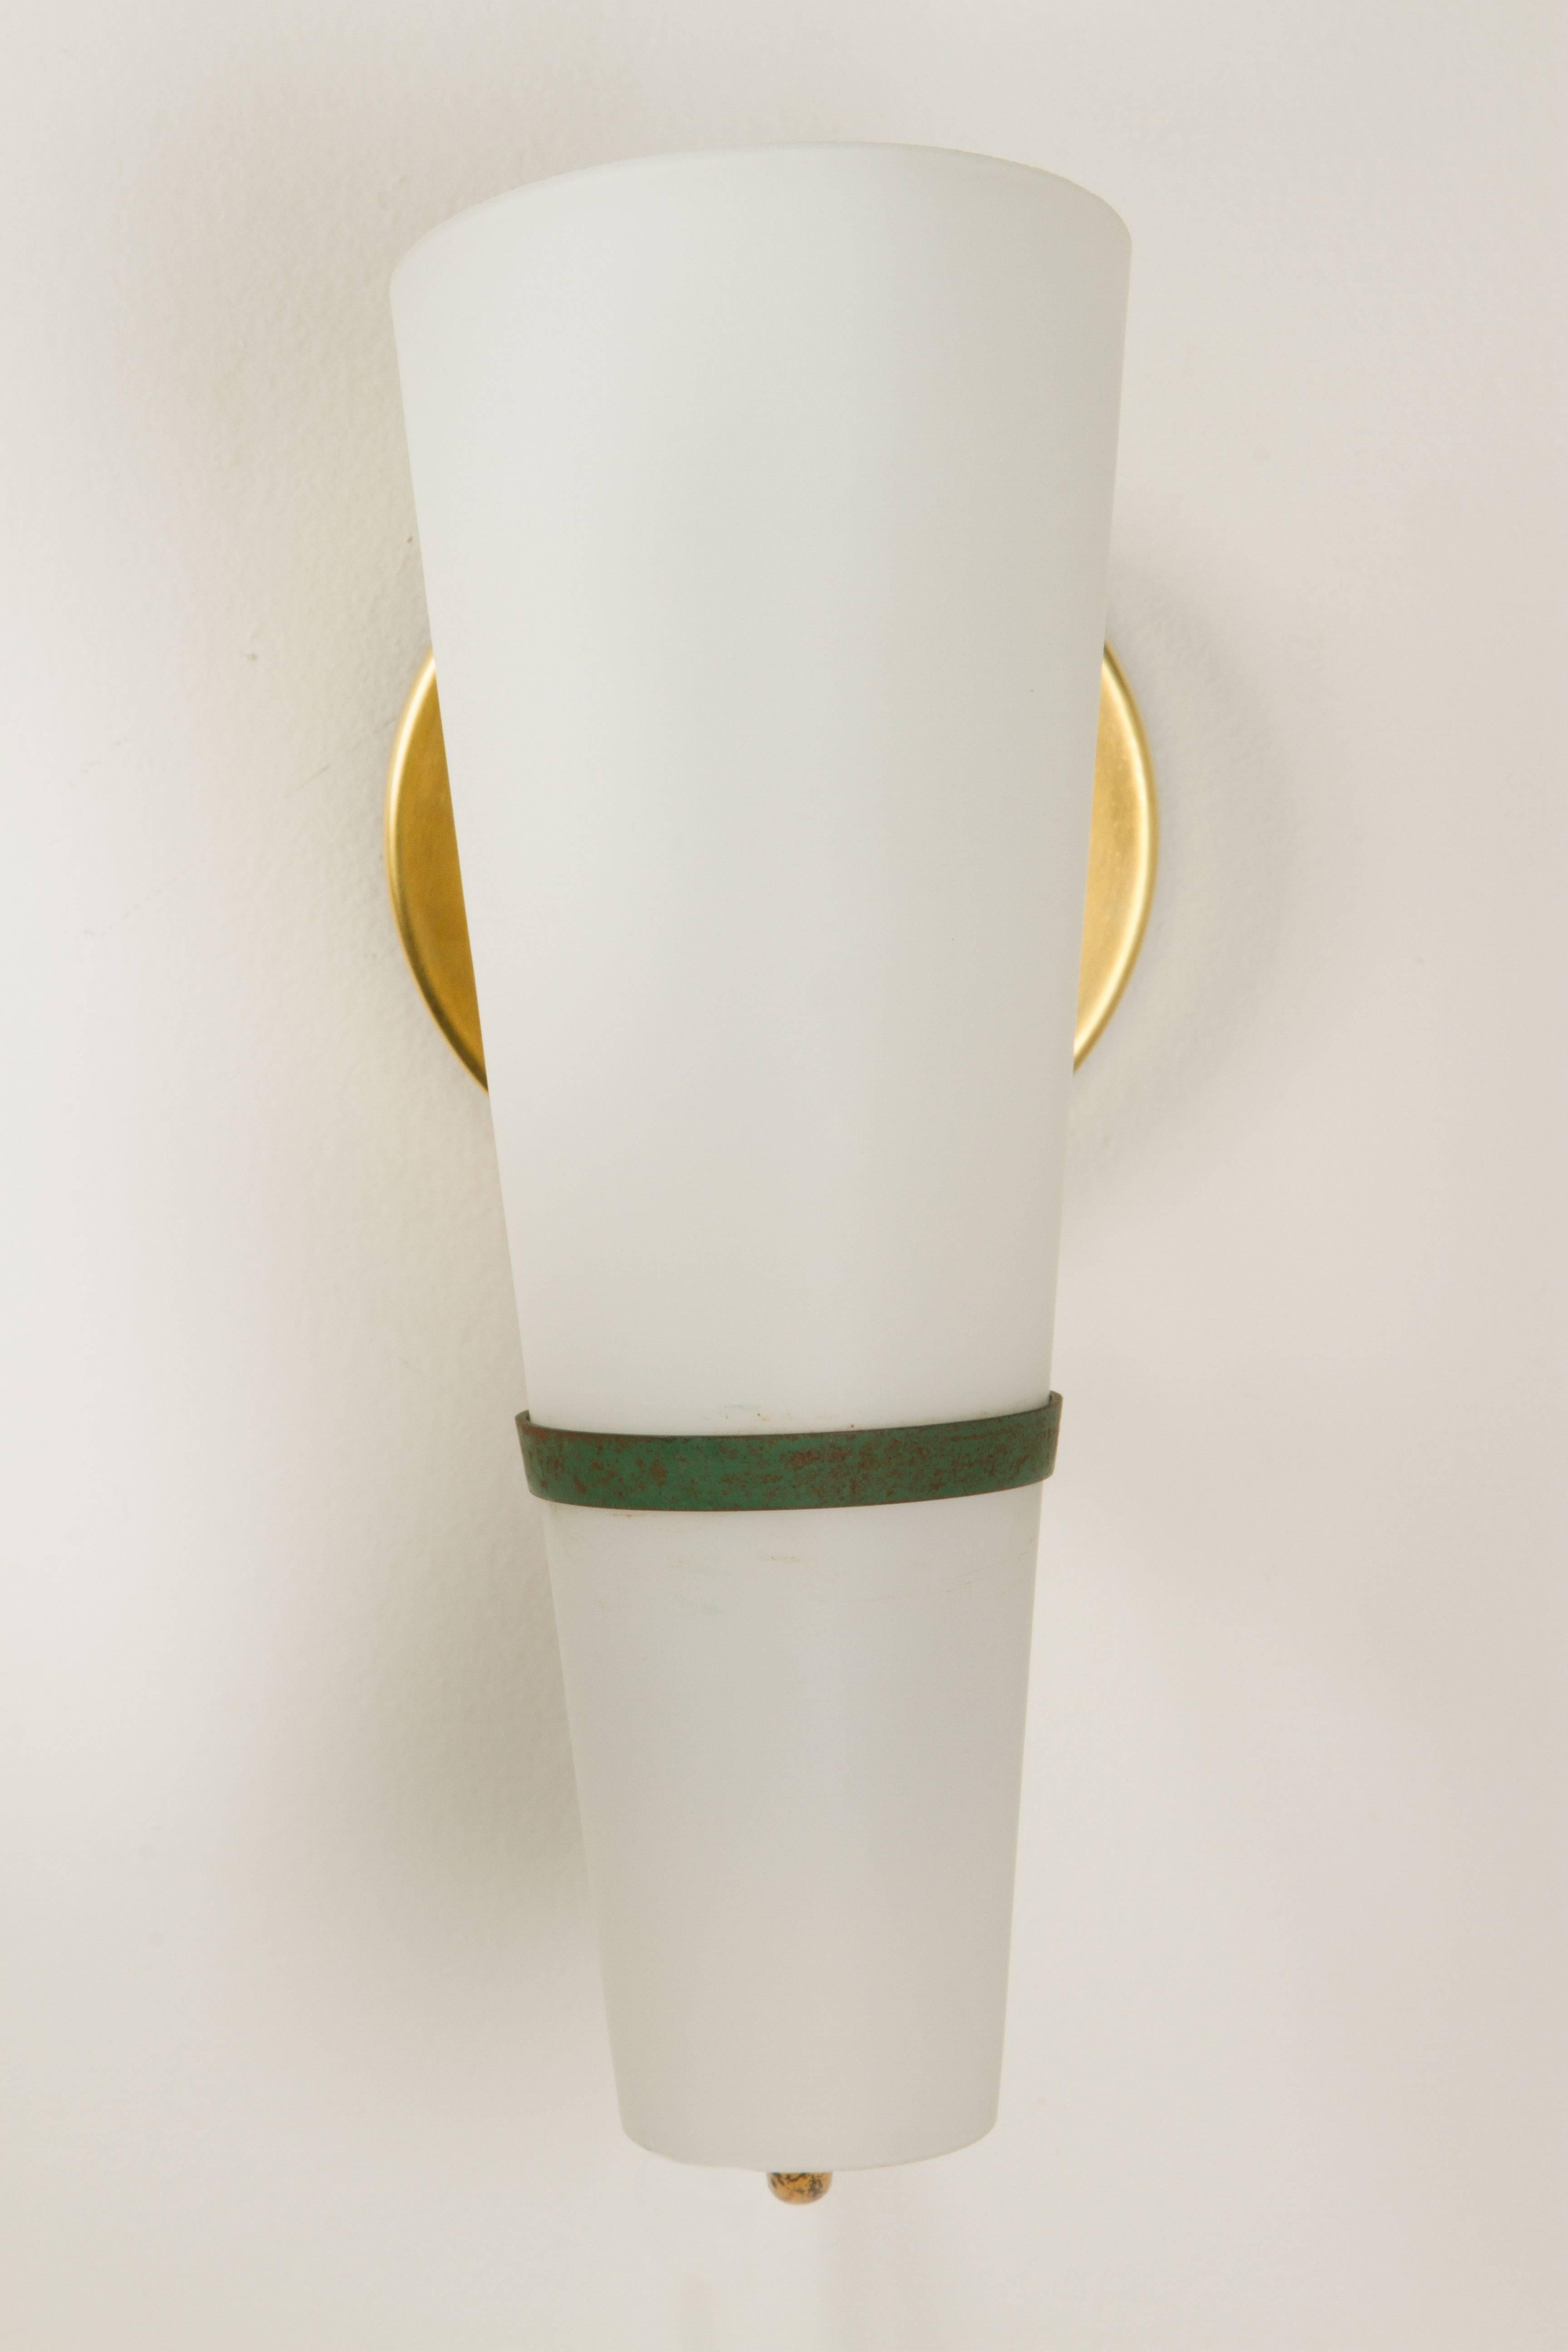 1950s Stilnovo sconces. Executed in opaline glass, brass and green enameled metal, circa 1950s, Italy. 

Price is for the set of three.